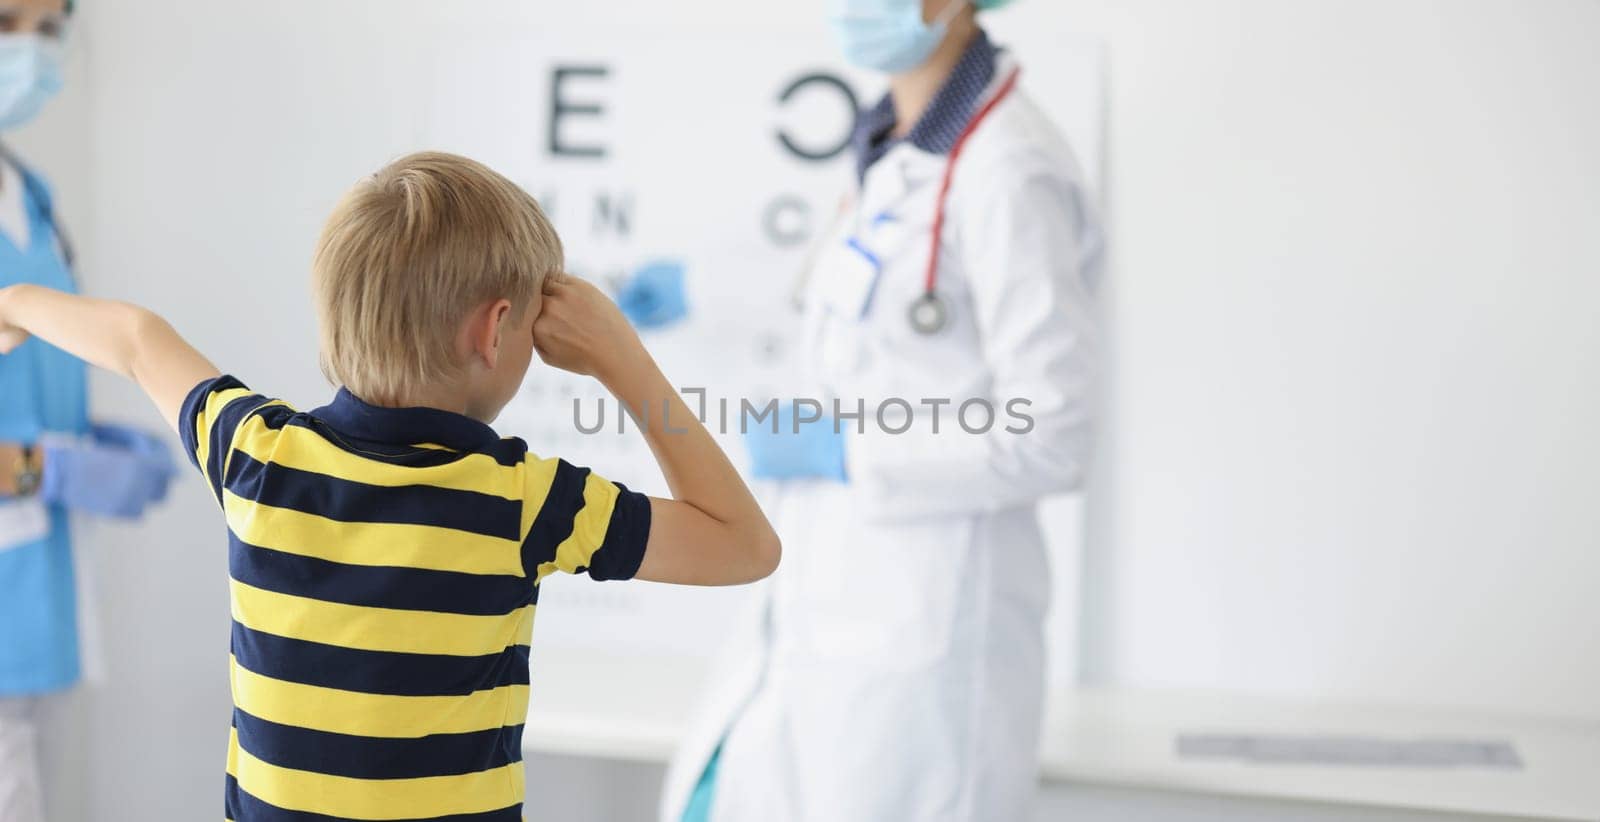 Portrait of boy on appointment in clinic, oculist cabinet, sight diagnostic closing eye and say out loud letter on board. Health, ophthalmology concept